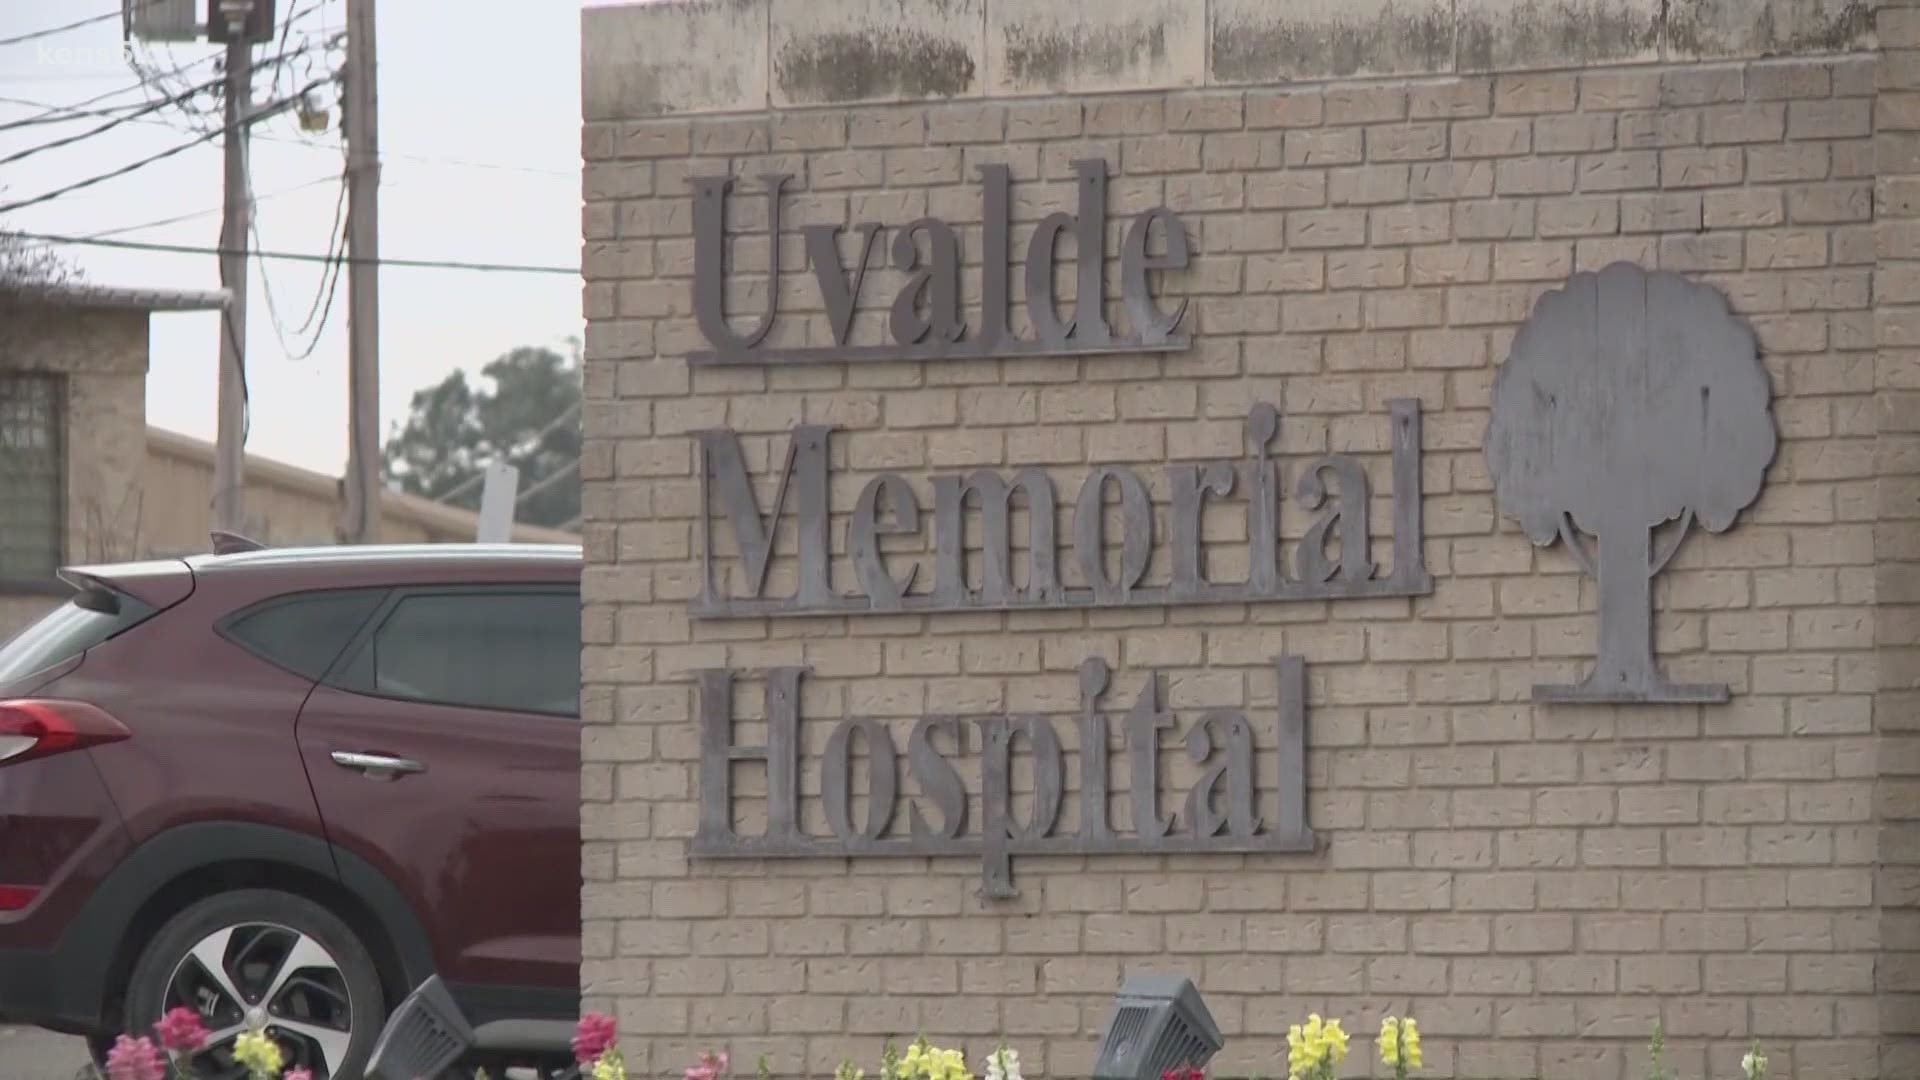 Uvalde County has experienced a sharper uptick in new COVID-19 cases than nearly anywhere else in Texas.